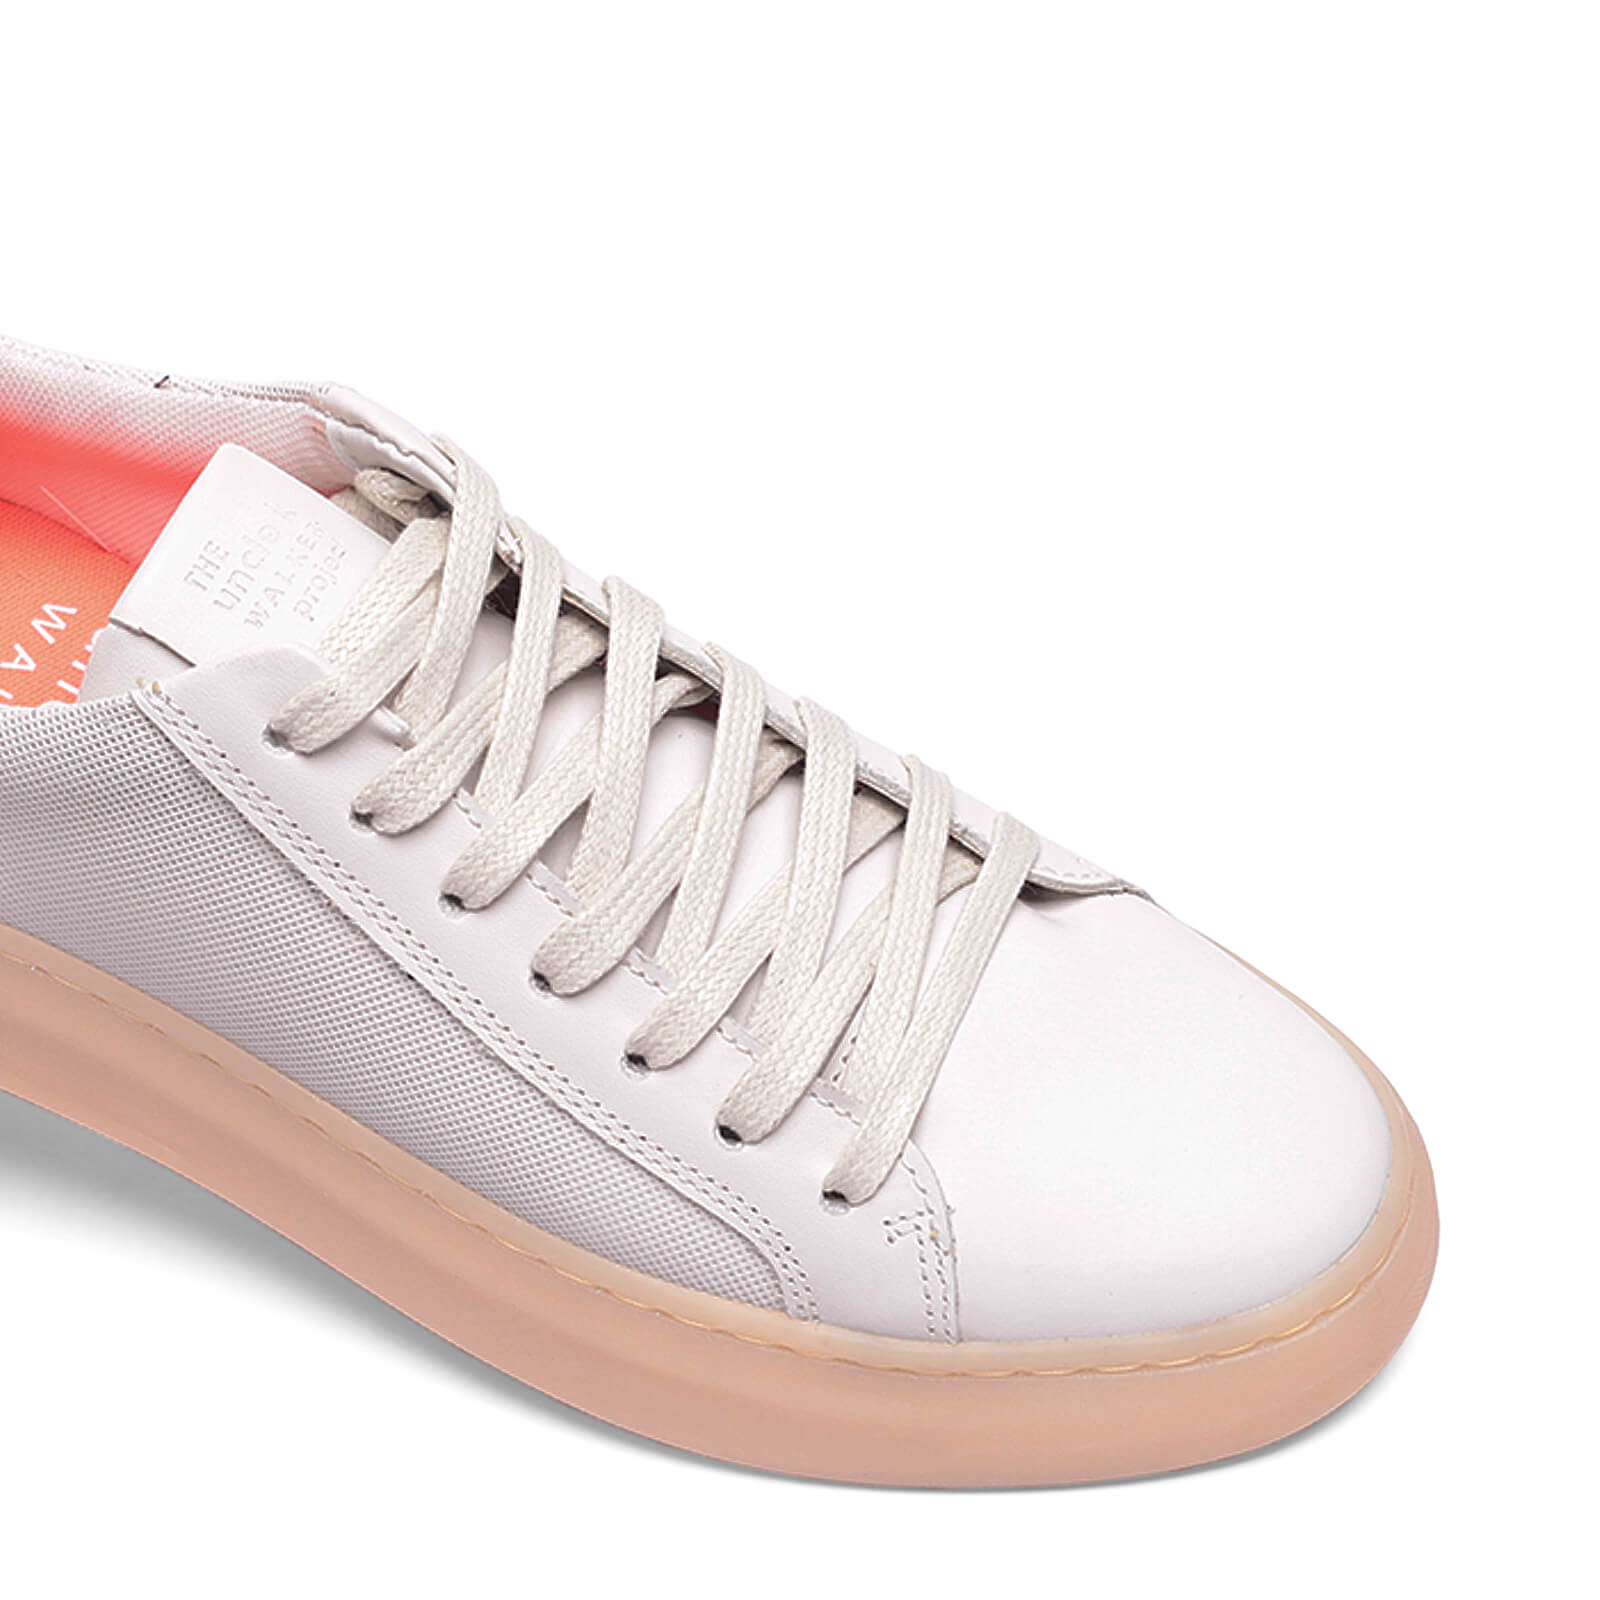 tenis-couro-plat-unclek-off-white-7